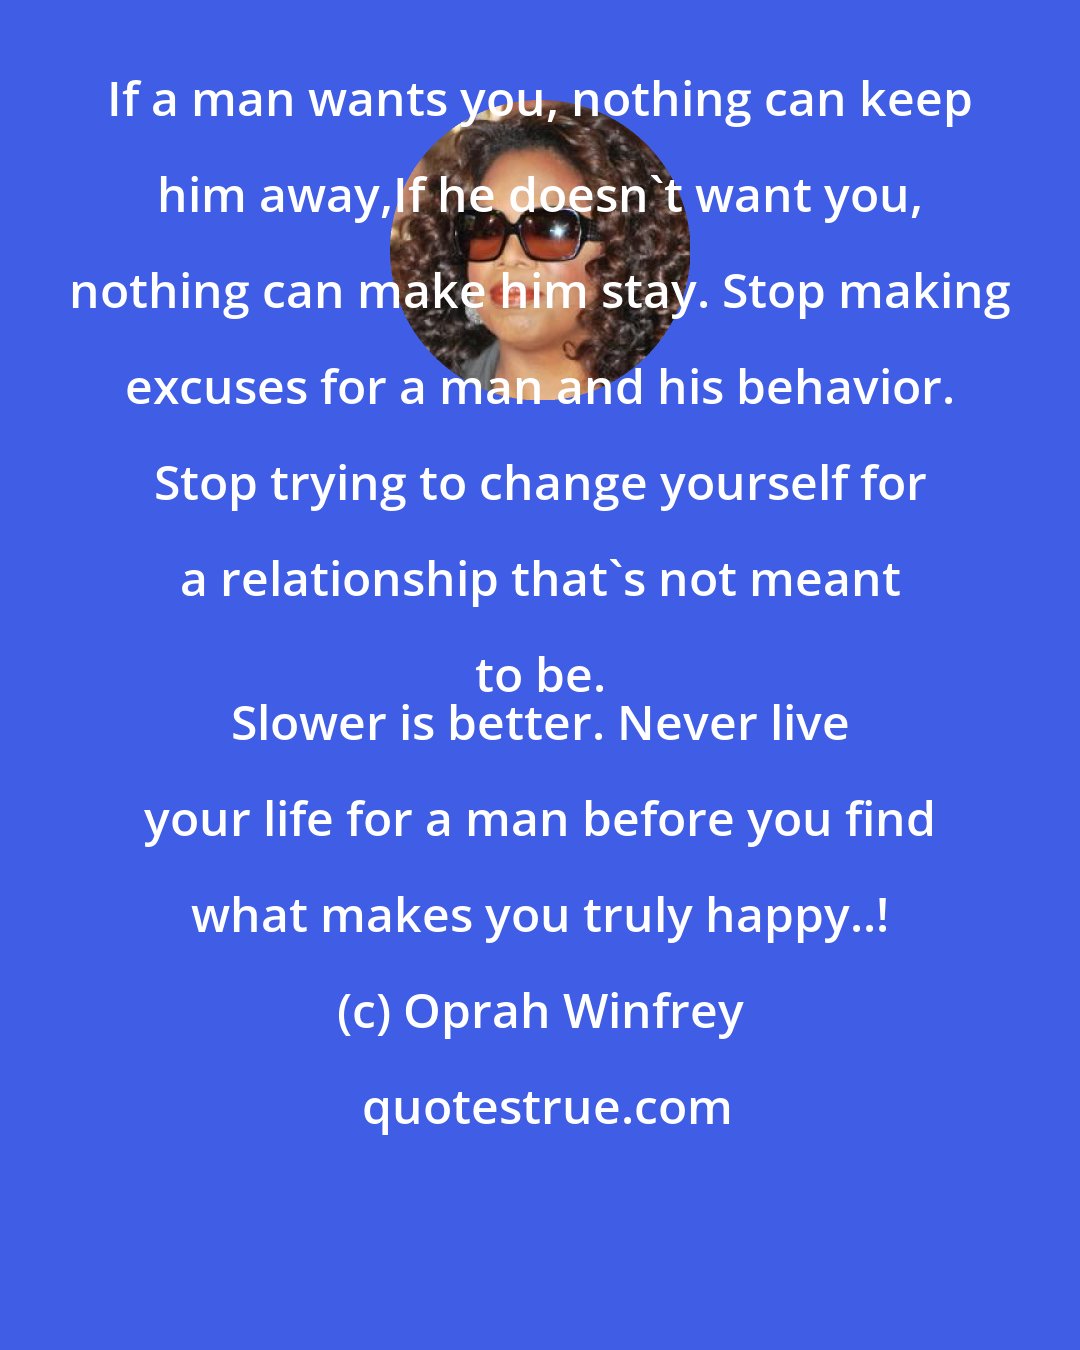 Oprah Winfrey: If a man wants you, nothing can keep him away,If he doesn't want you, nothing can make him stay. Stop making excuses for a man and his behavior. Stop trying to change yourself for a relationship that's not meant to be. 
 Slower is better. Never live your life for a man before you find what makes you truly happy..!